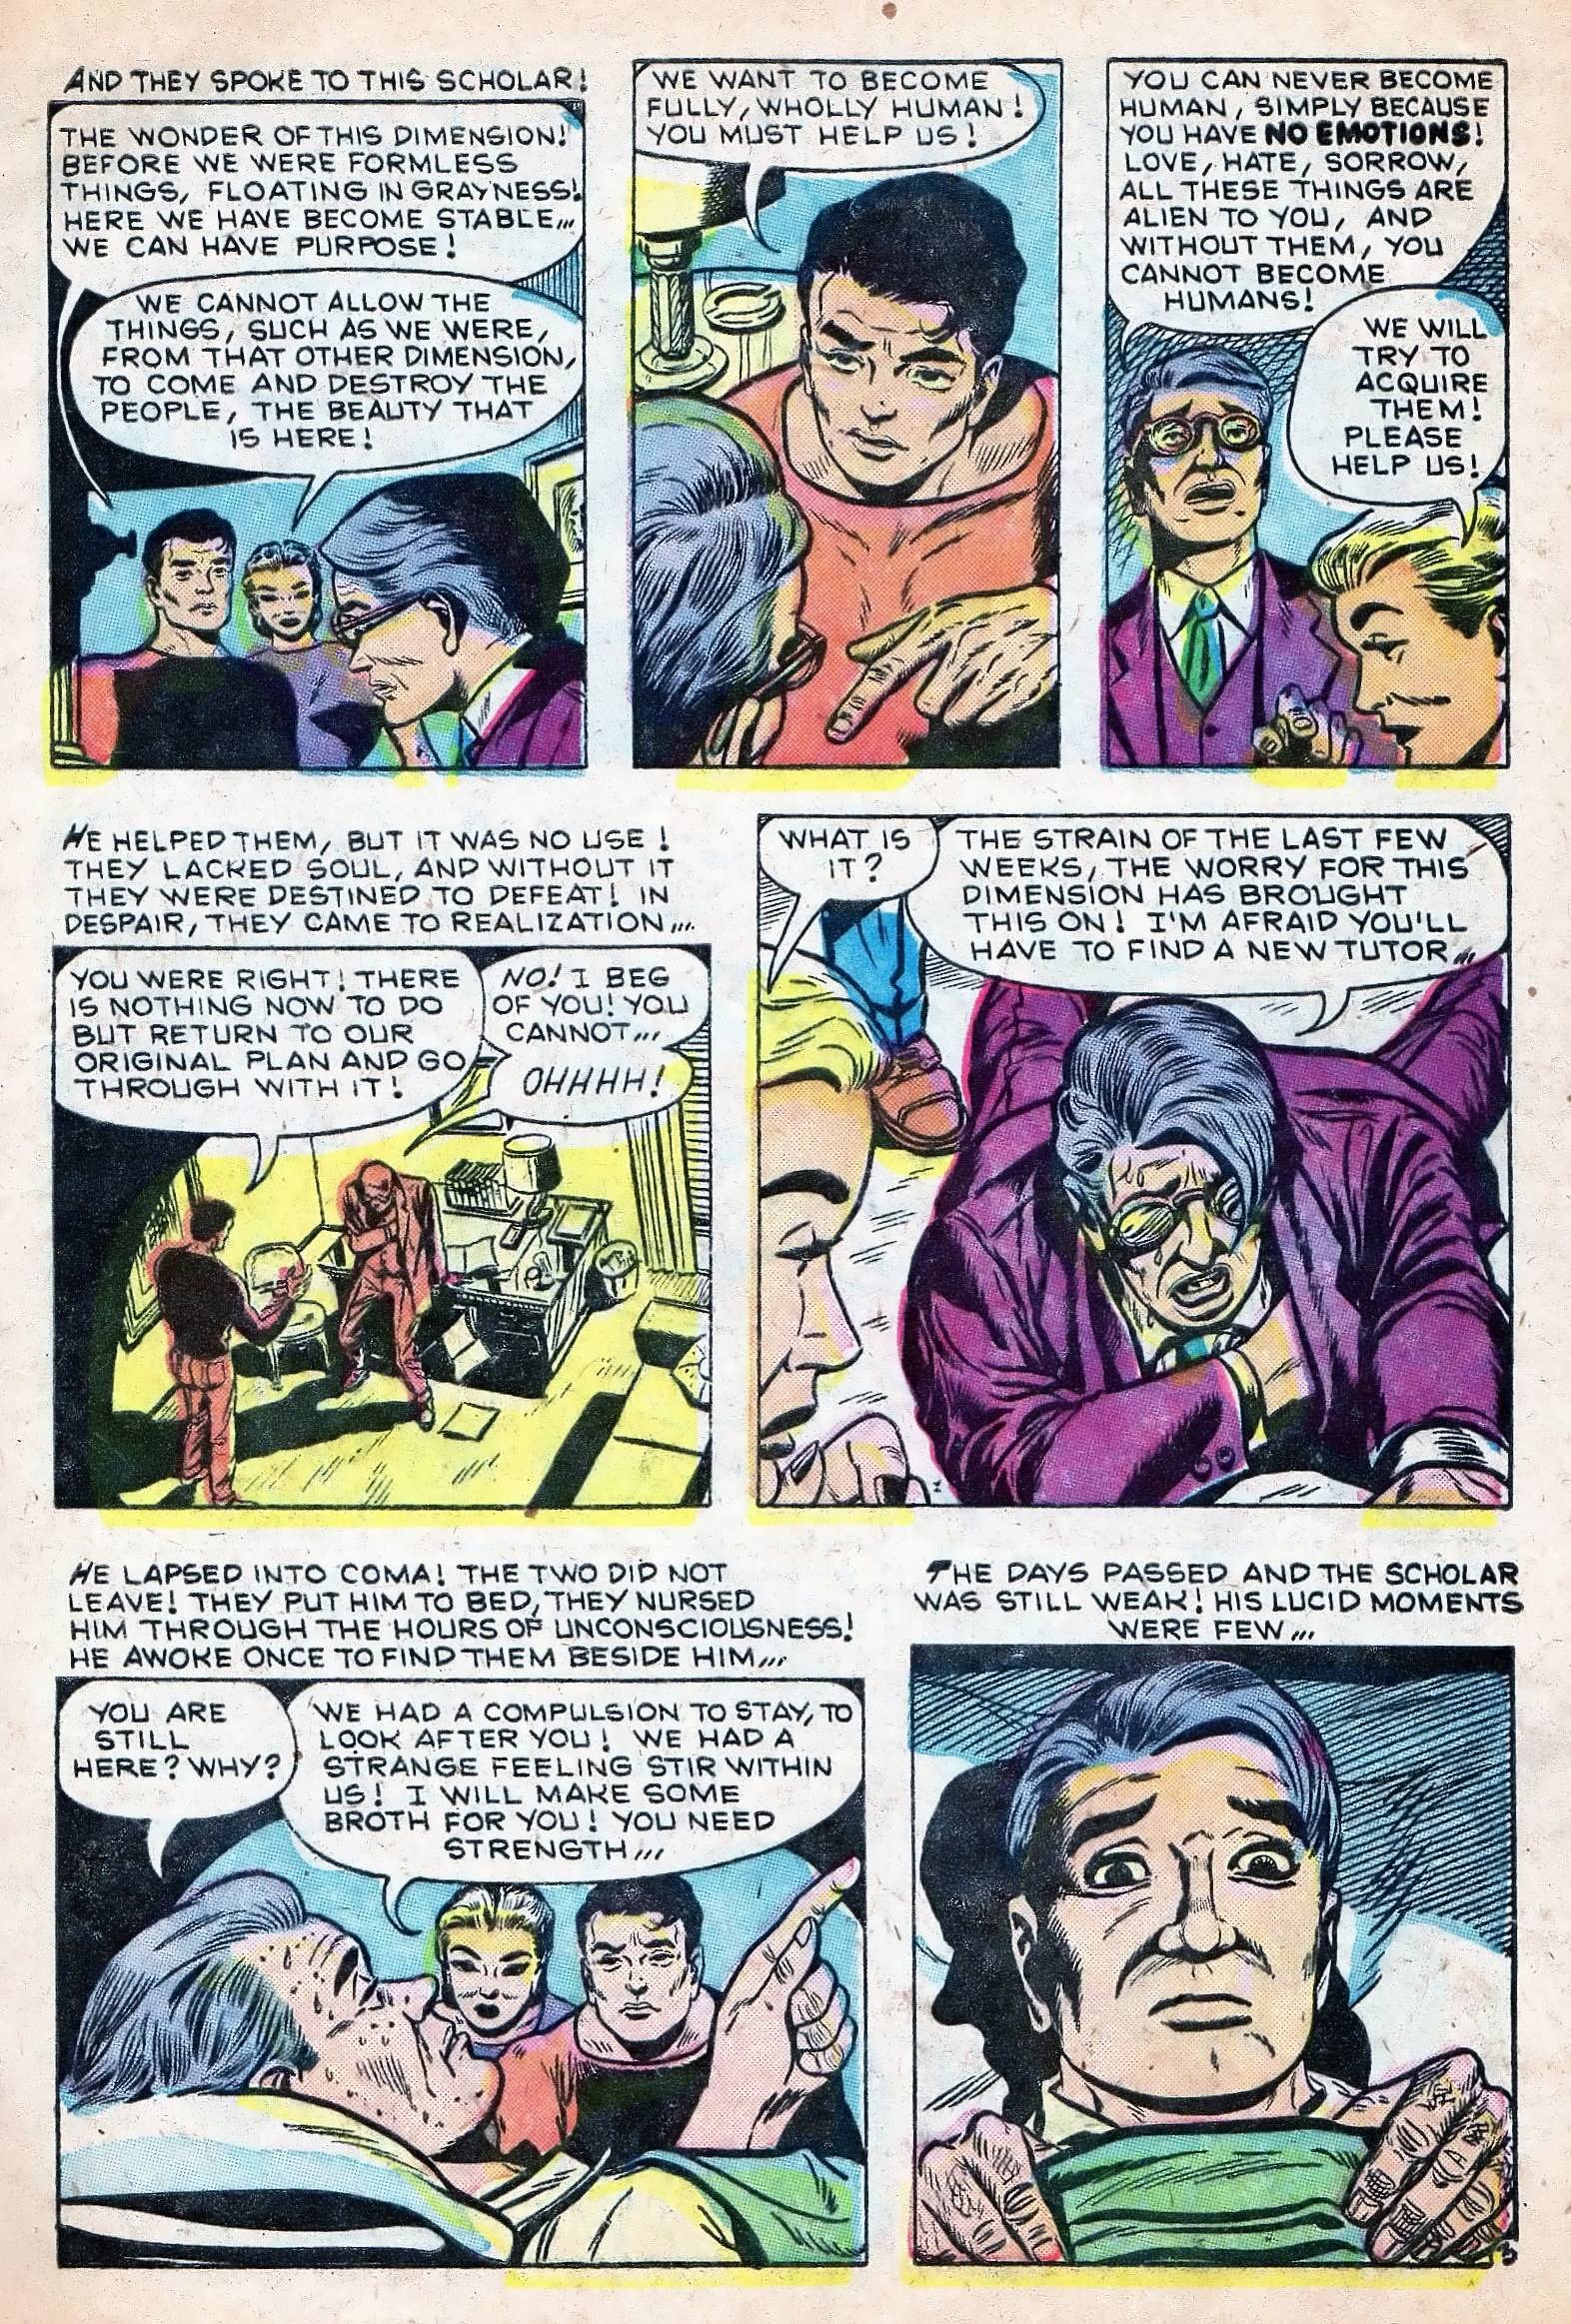 Marvel Tales (1949) 141 Page 4